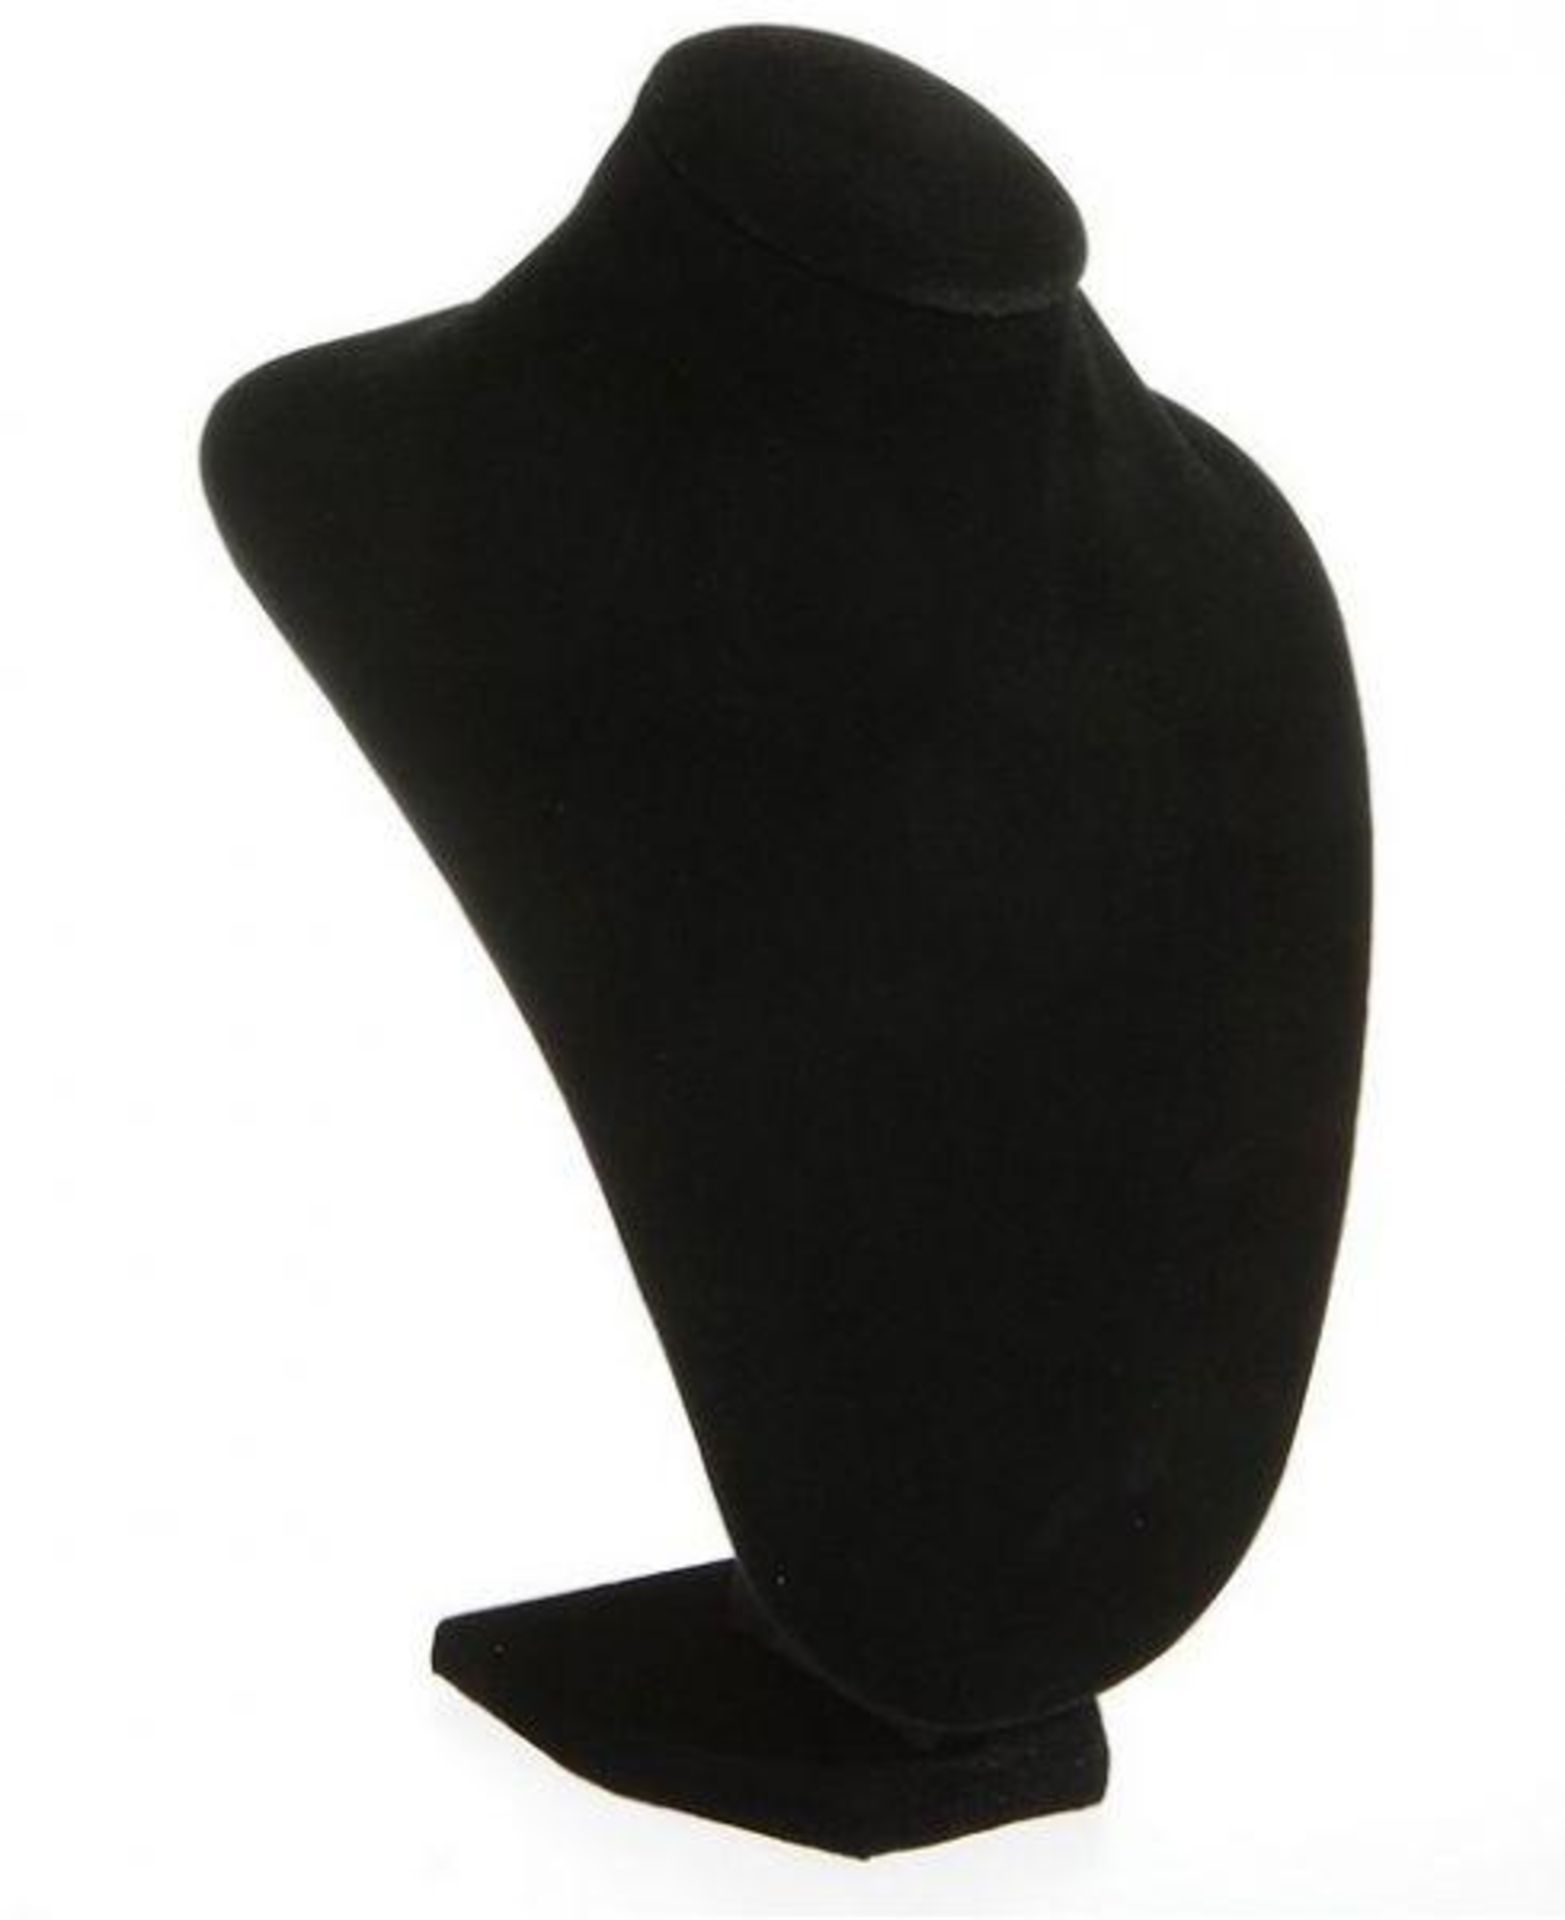 Trade Quantity - 5 x Jewellery Display Upright Busts in a Black Velvet Finish - 8" Includes free